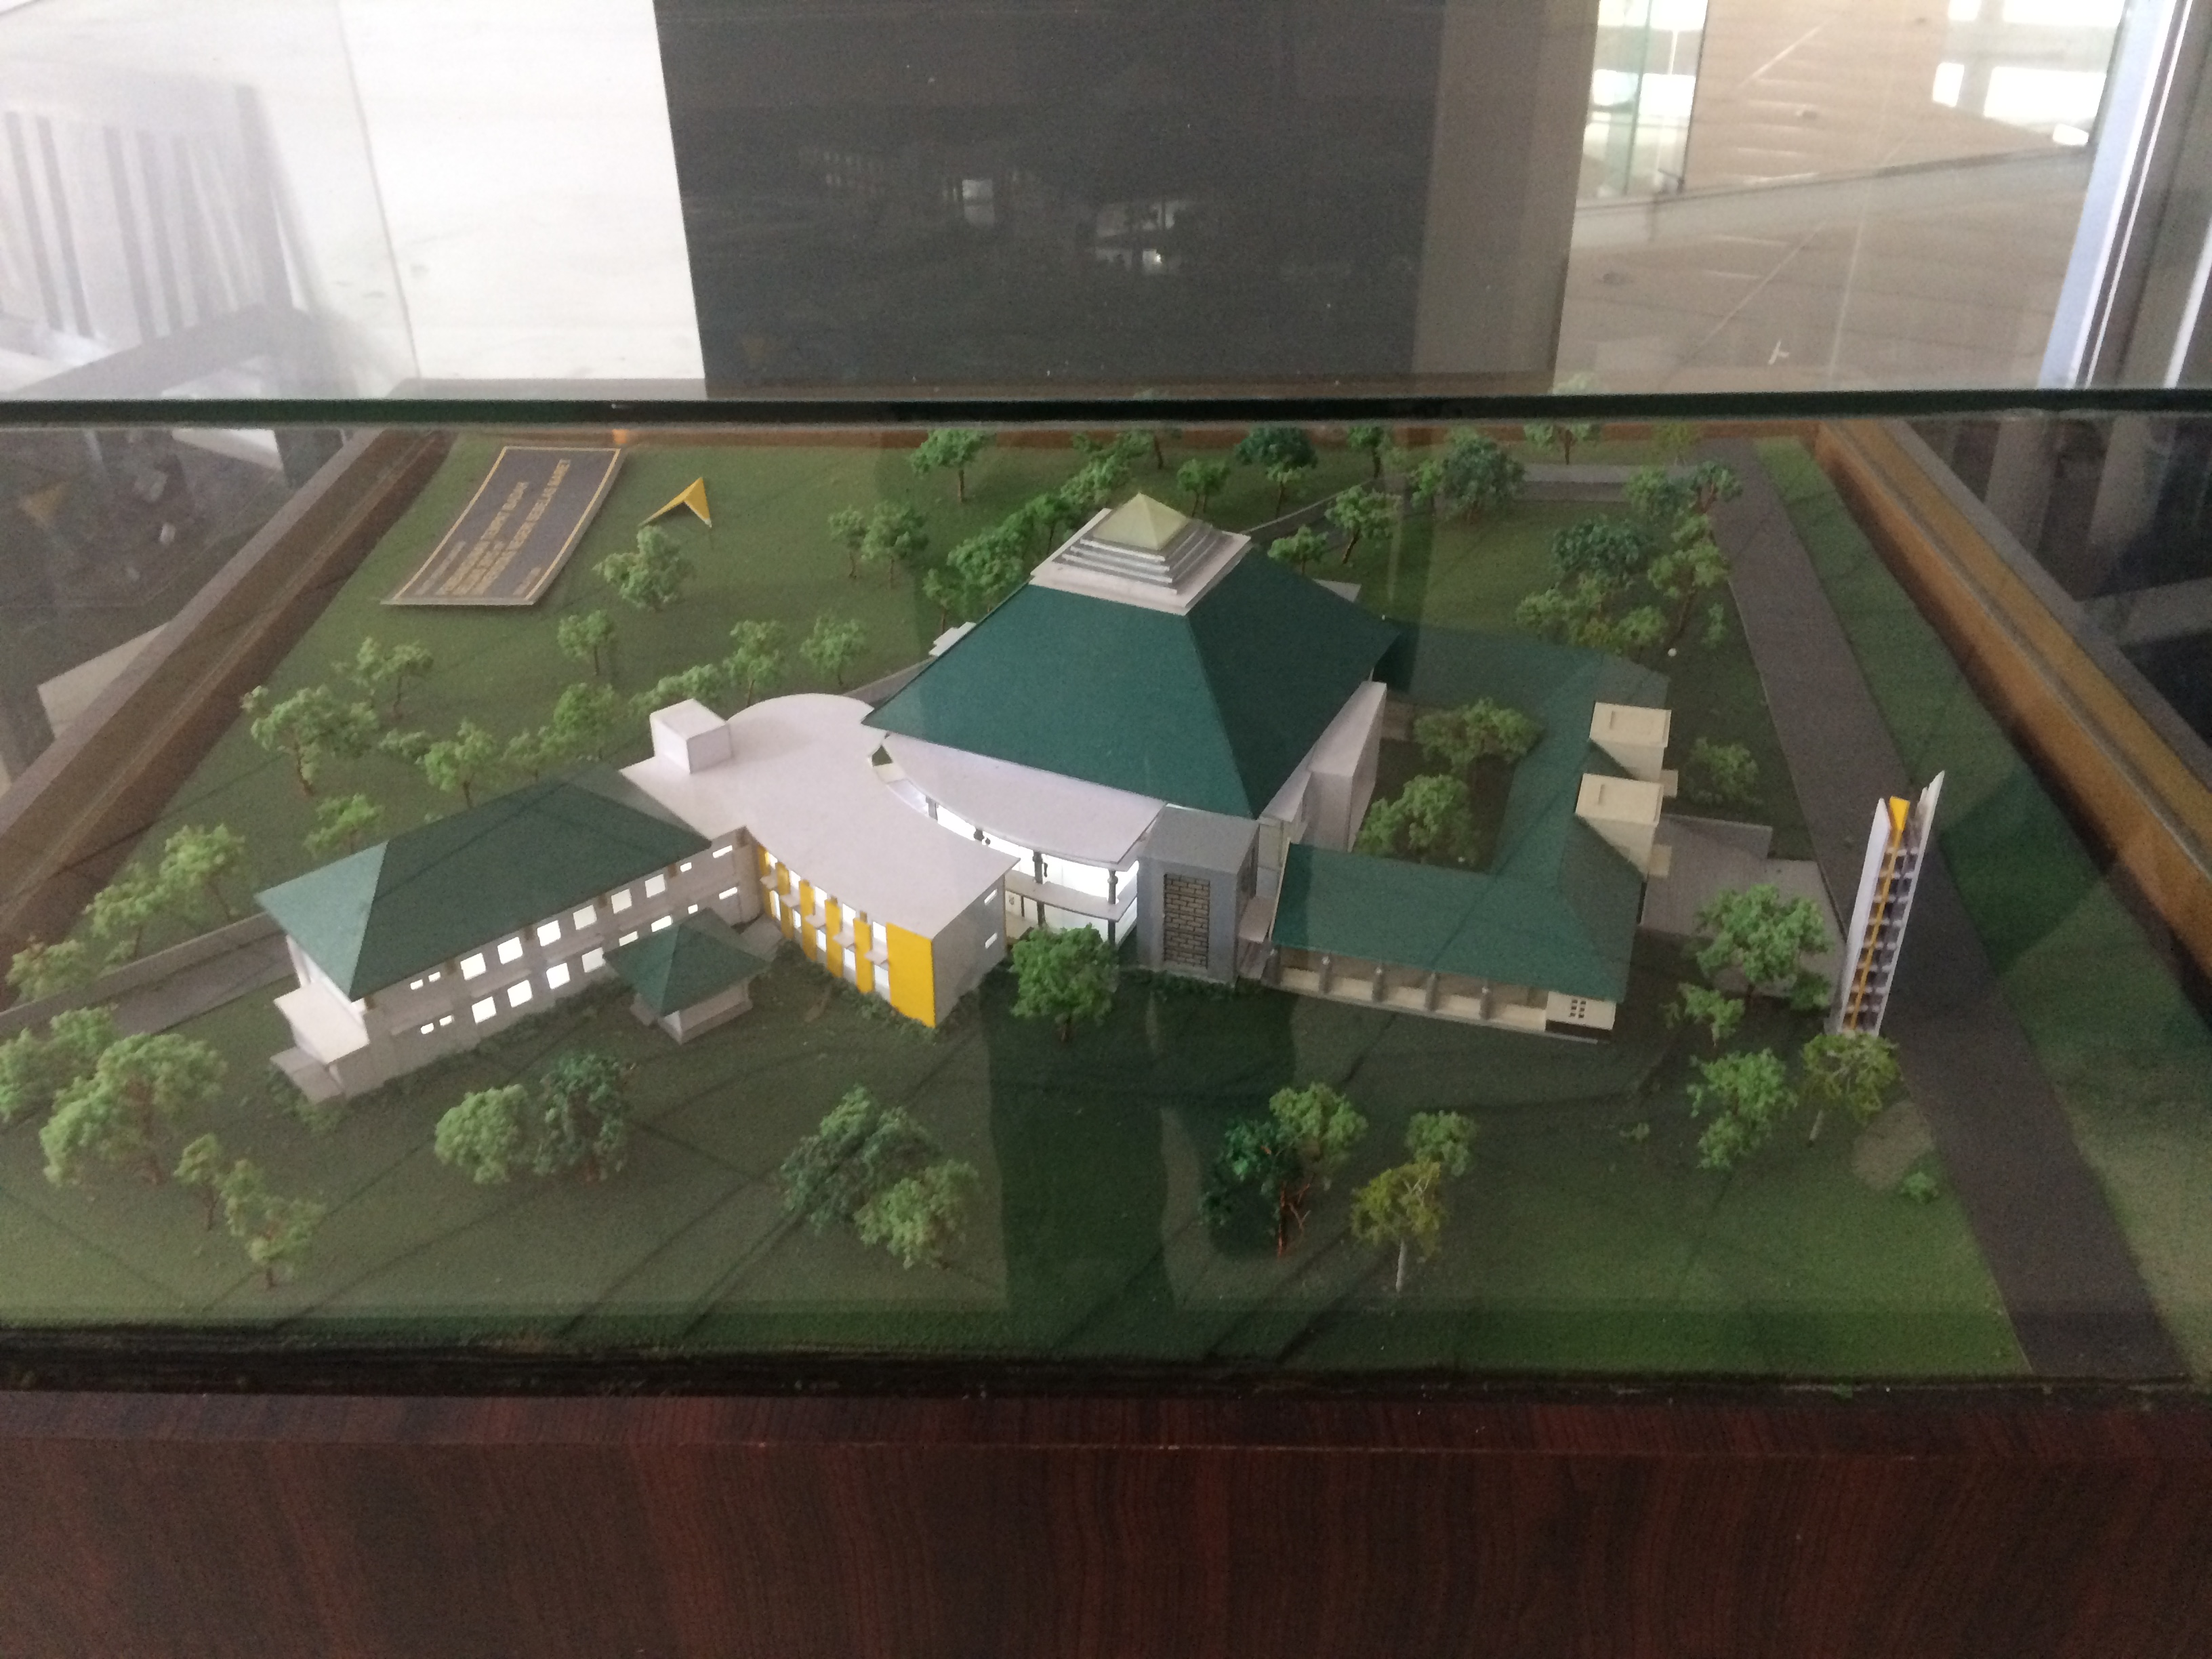 A miniature of the UNS campus in Professor Yoyo's office.